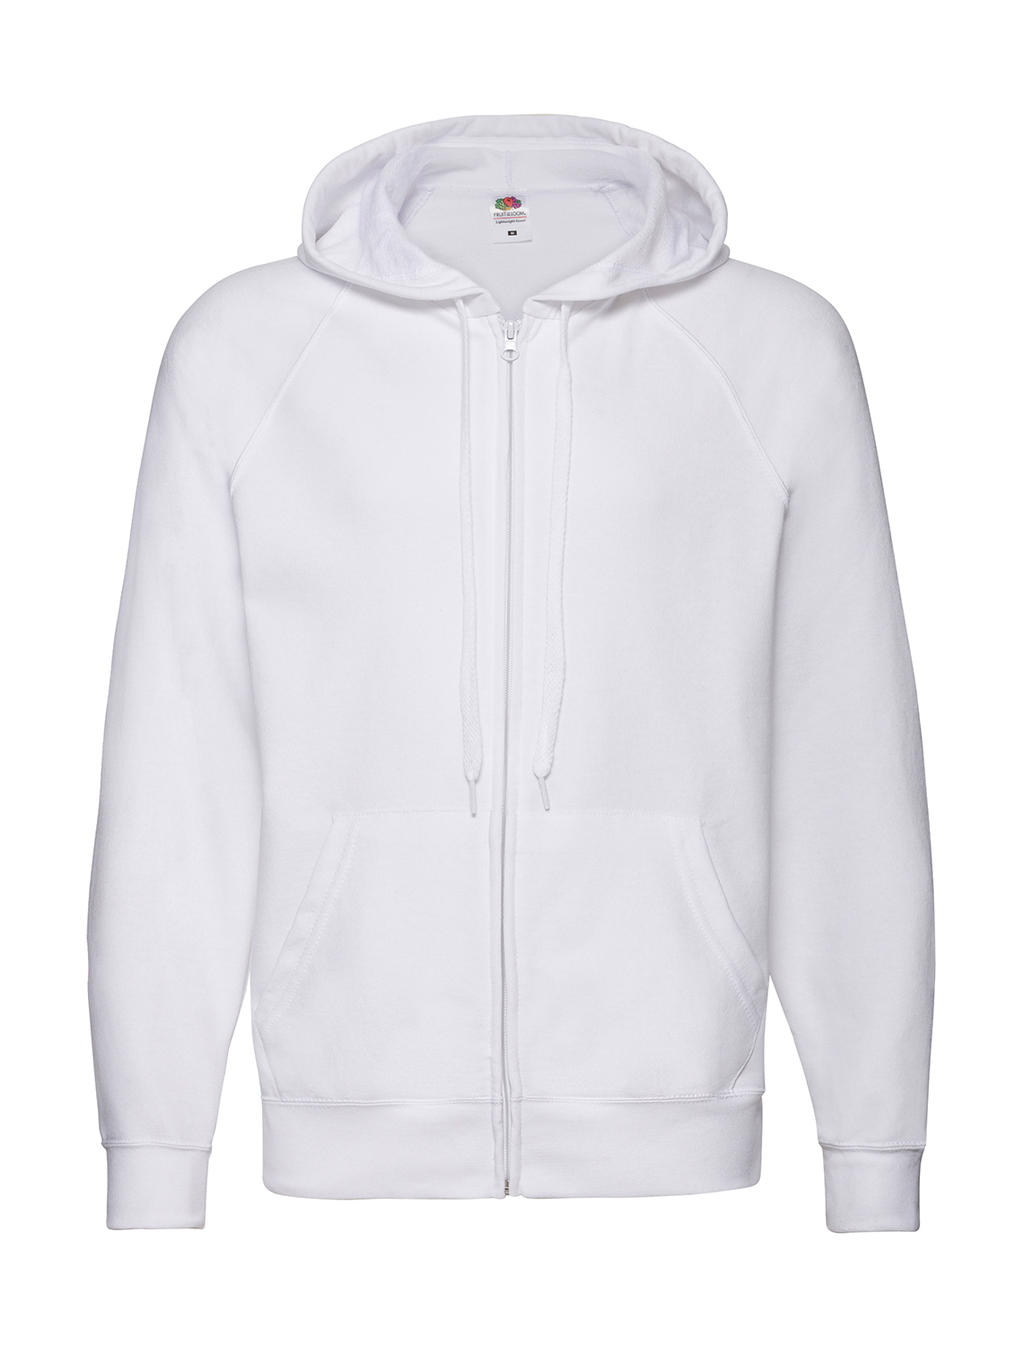  Lightweight Hooded Sweat Jacket in Farbe White